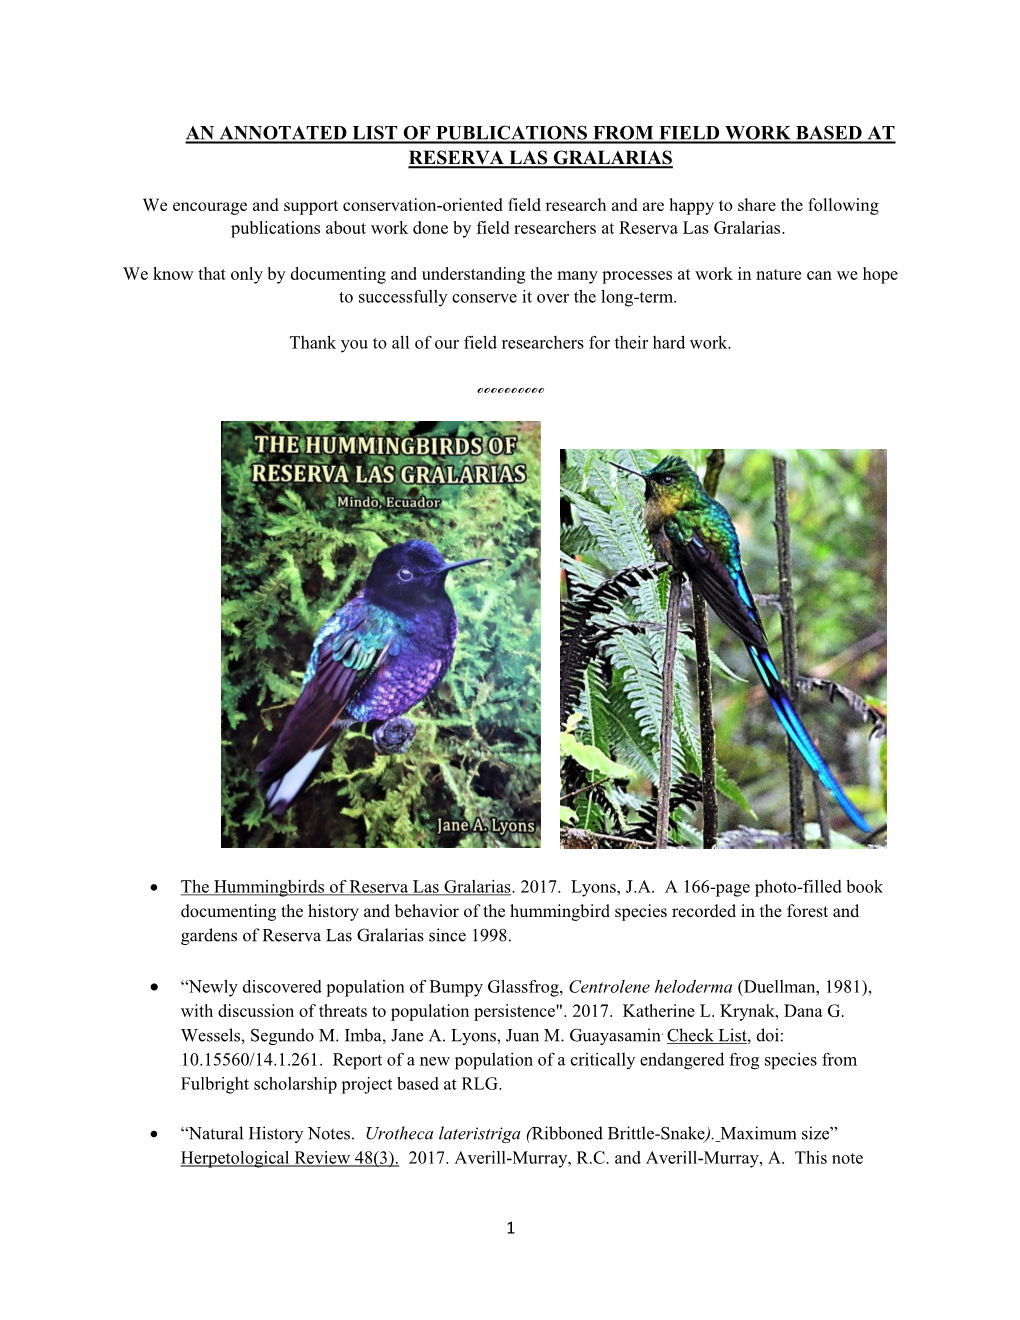 An Annotated List of Publications from Field Work Based at Reserva Las Gralarias